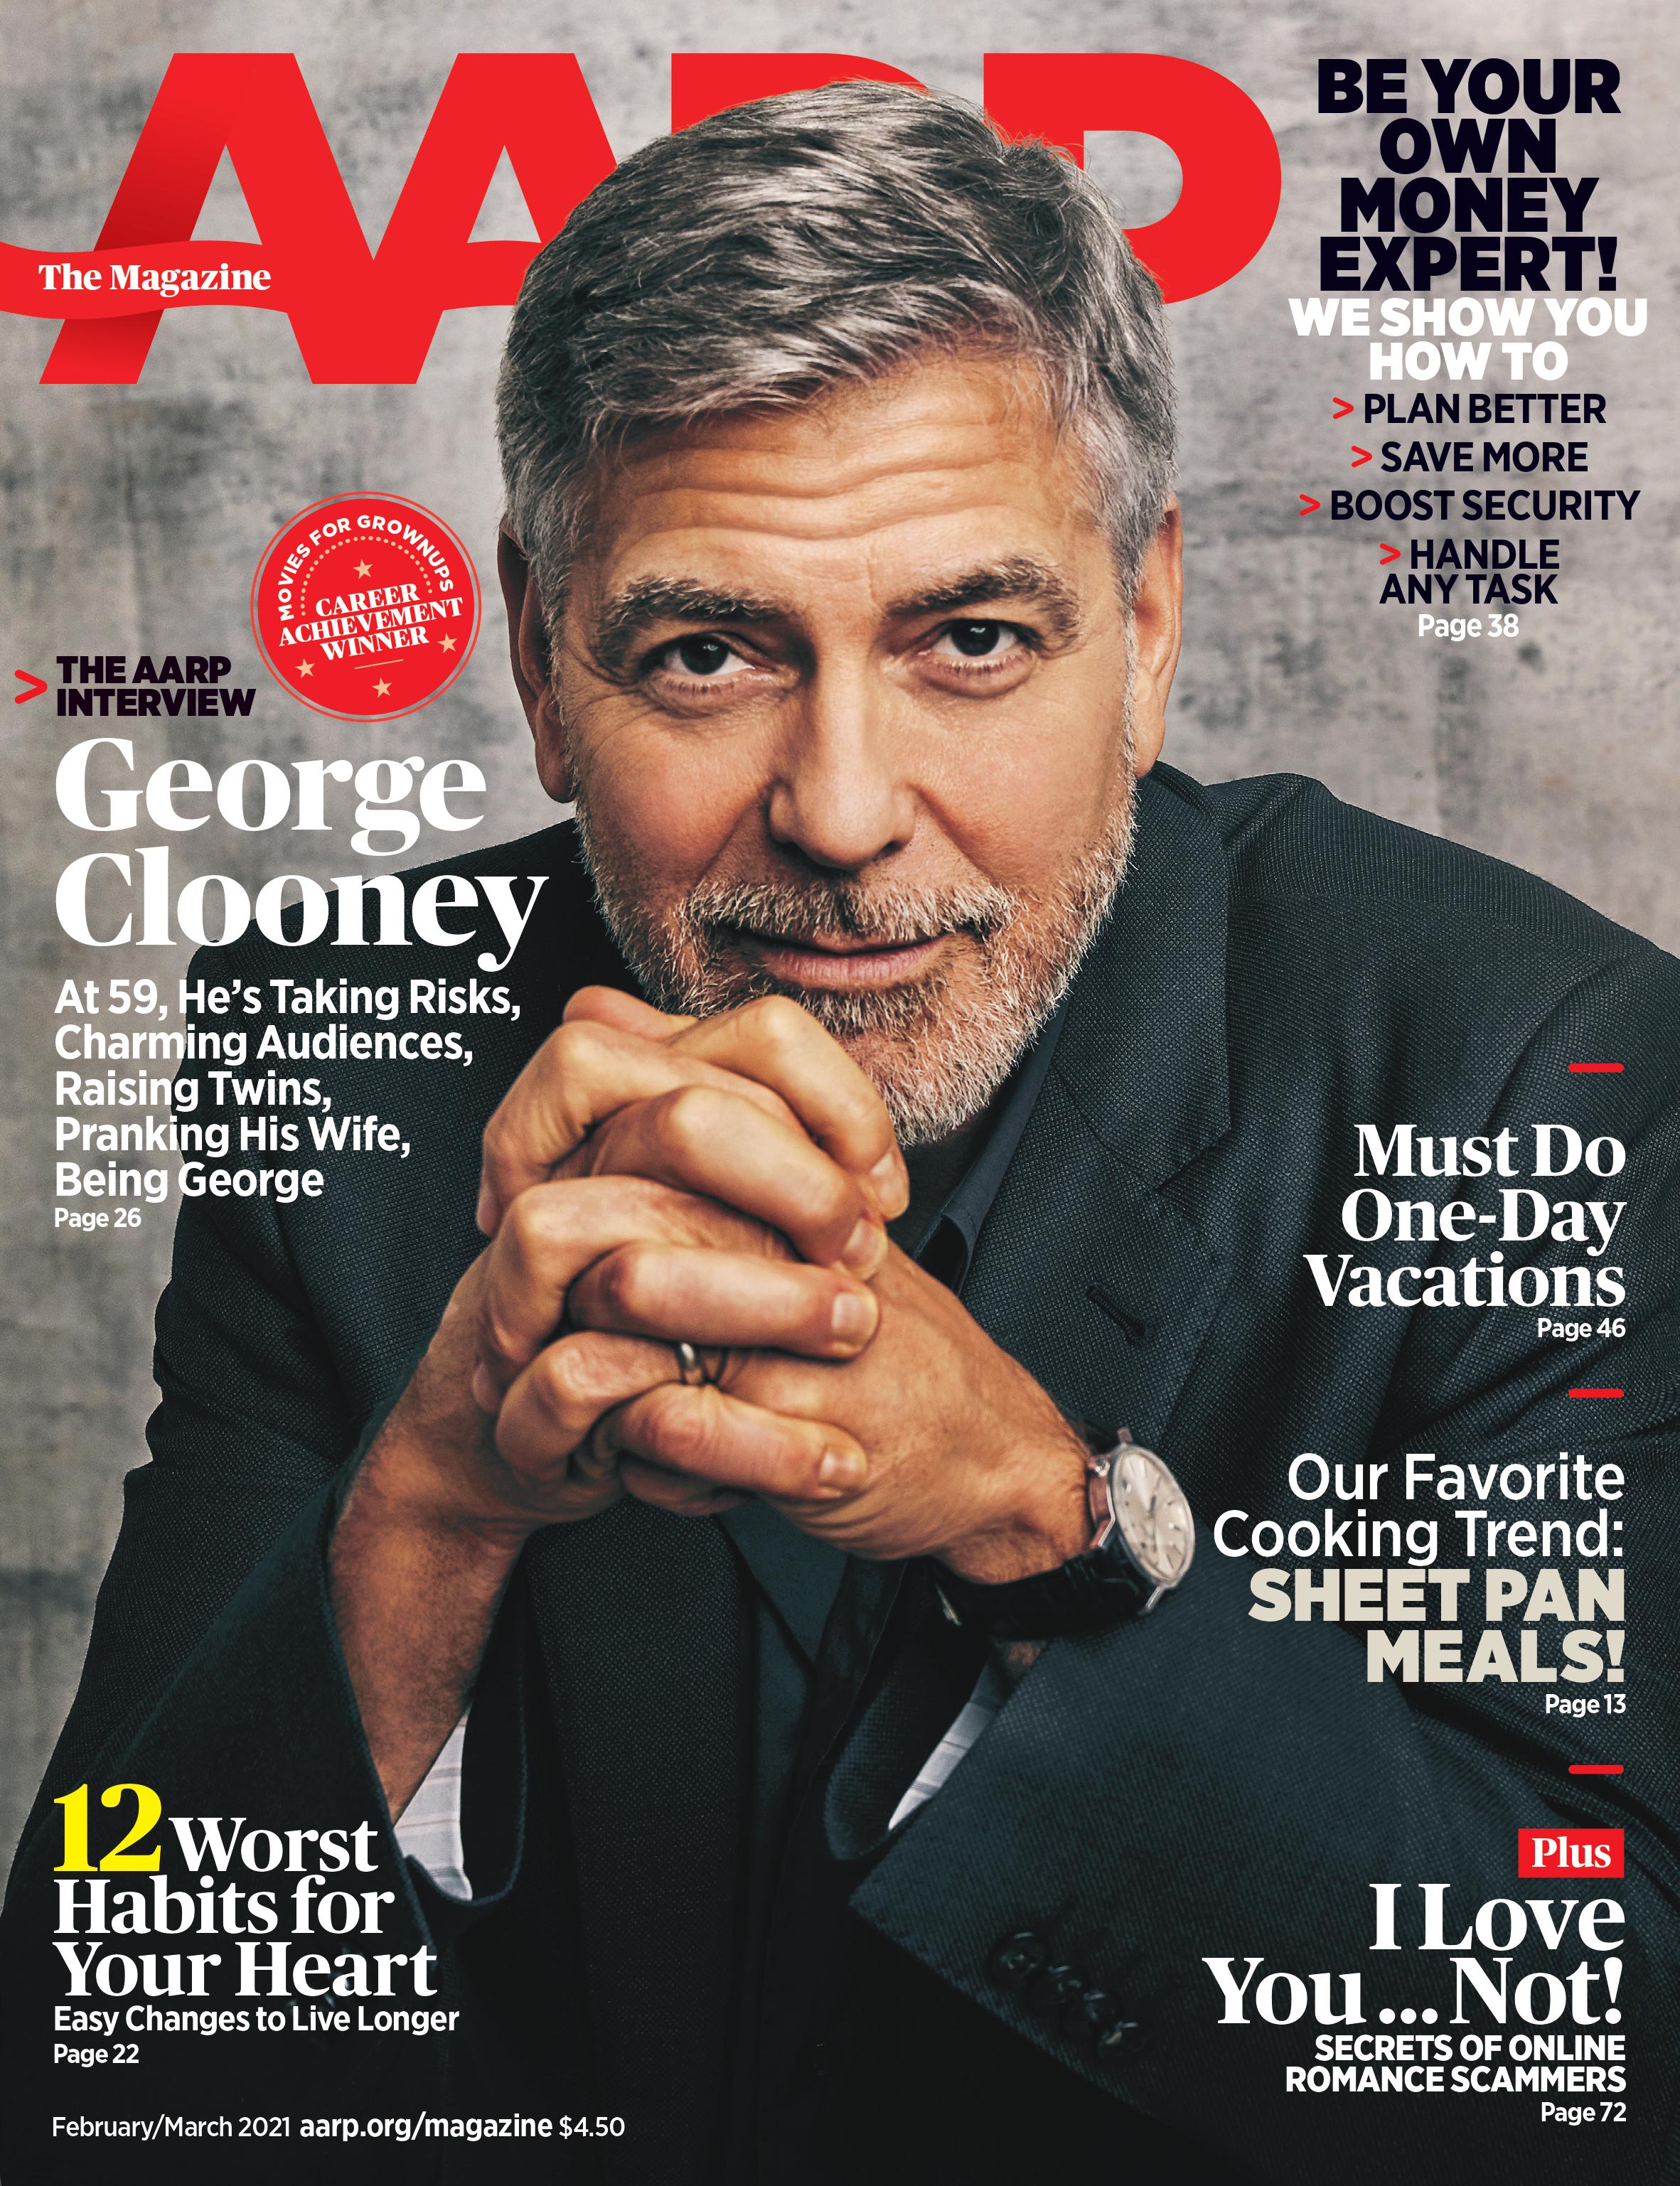 George Clooney alive and kicking